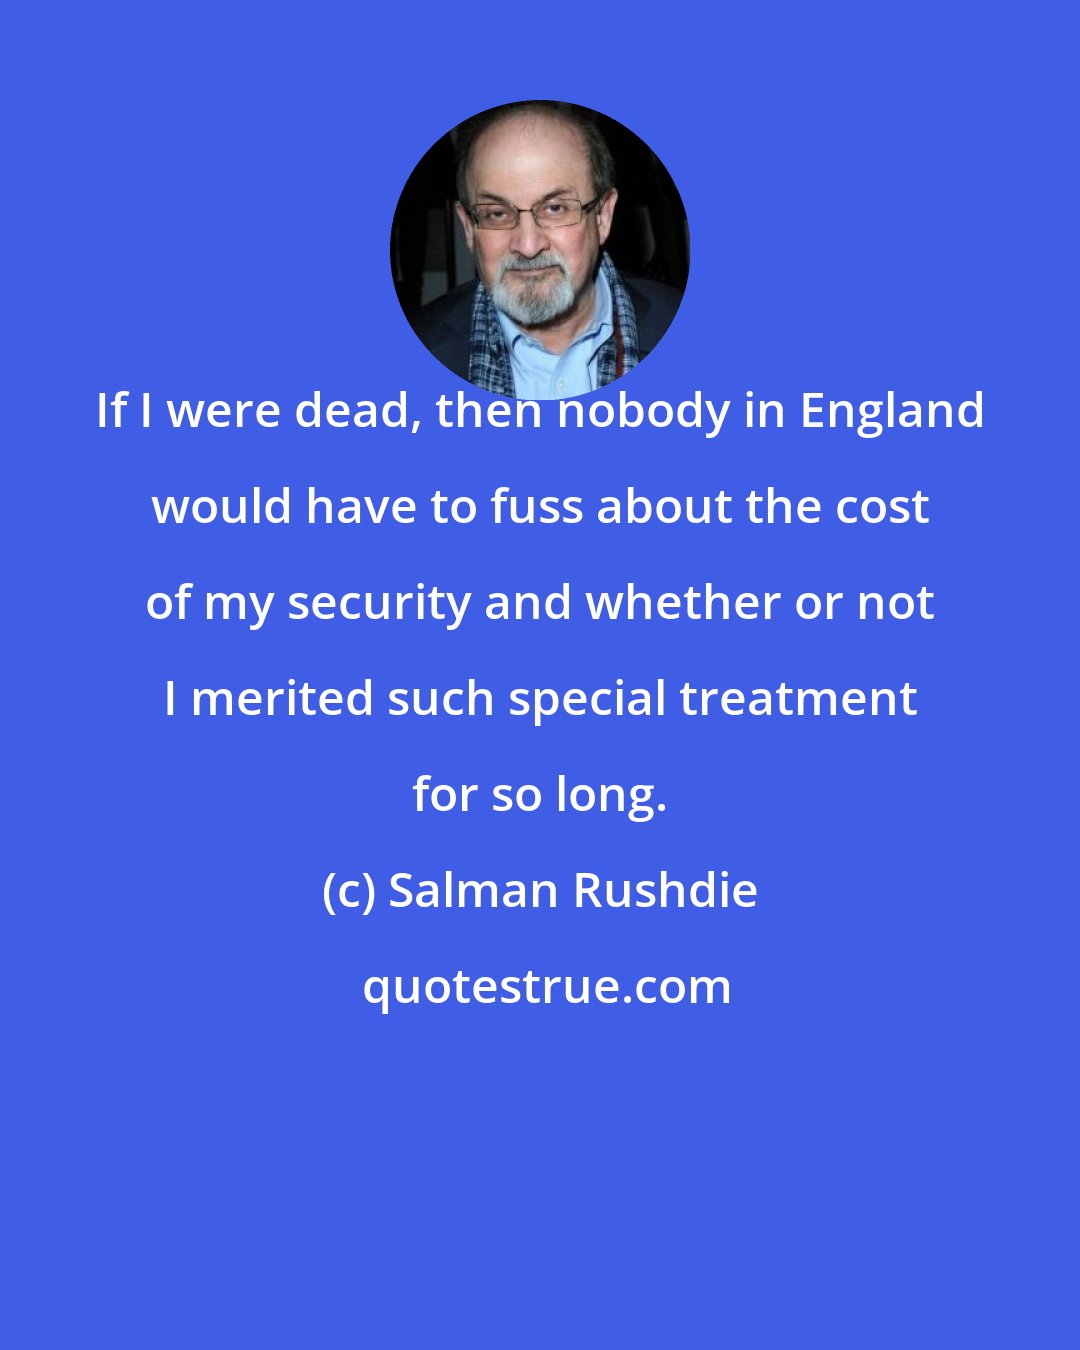 Salman Rushdie: If I were dead, then nobody in England would have to fuss about the cost of my security and whether or not I merited such special treatment for so long.